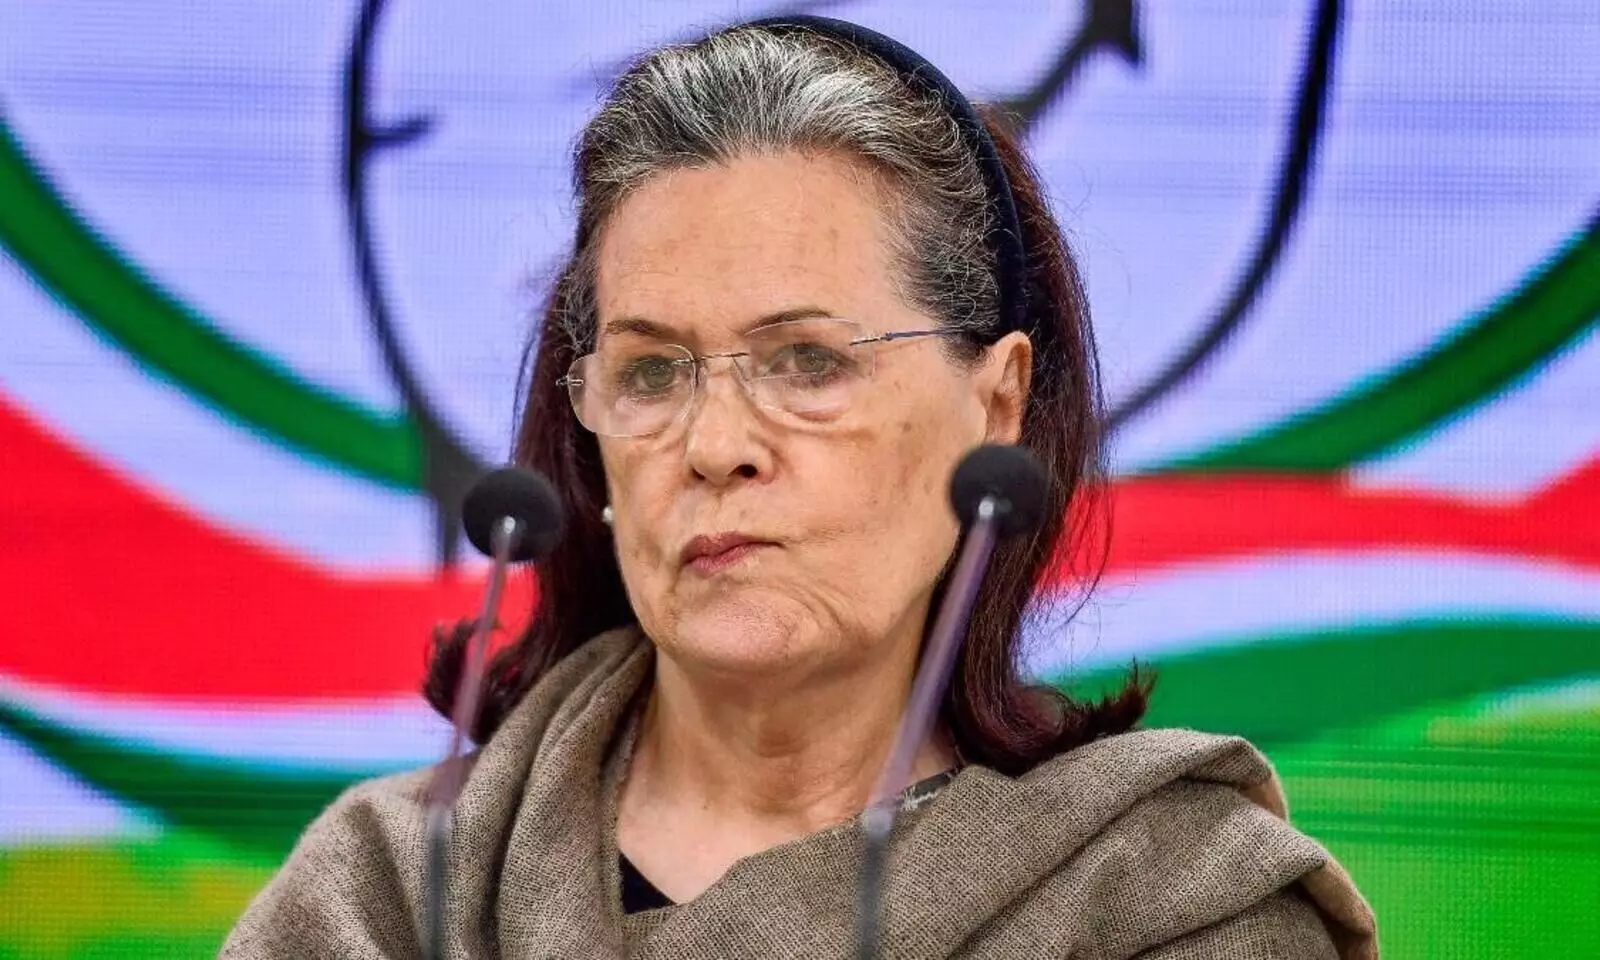 Democracy strangulated by govt: Sonia Gandhi reacts on suspension of MPs